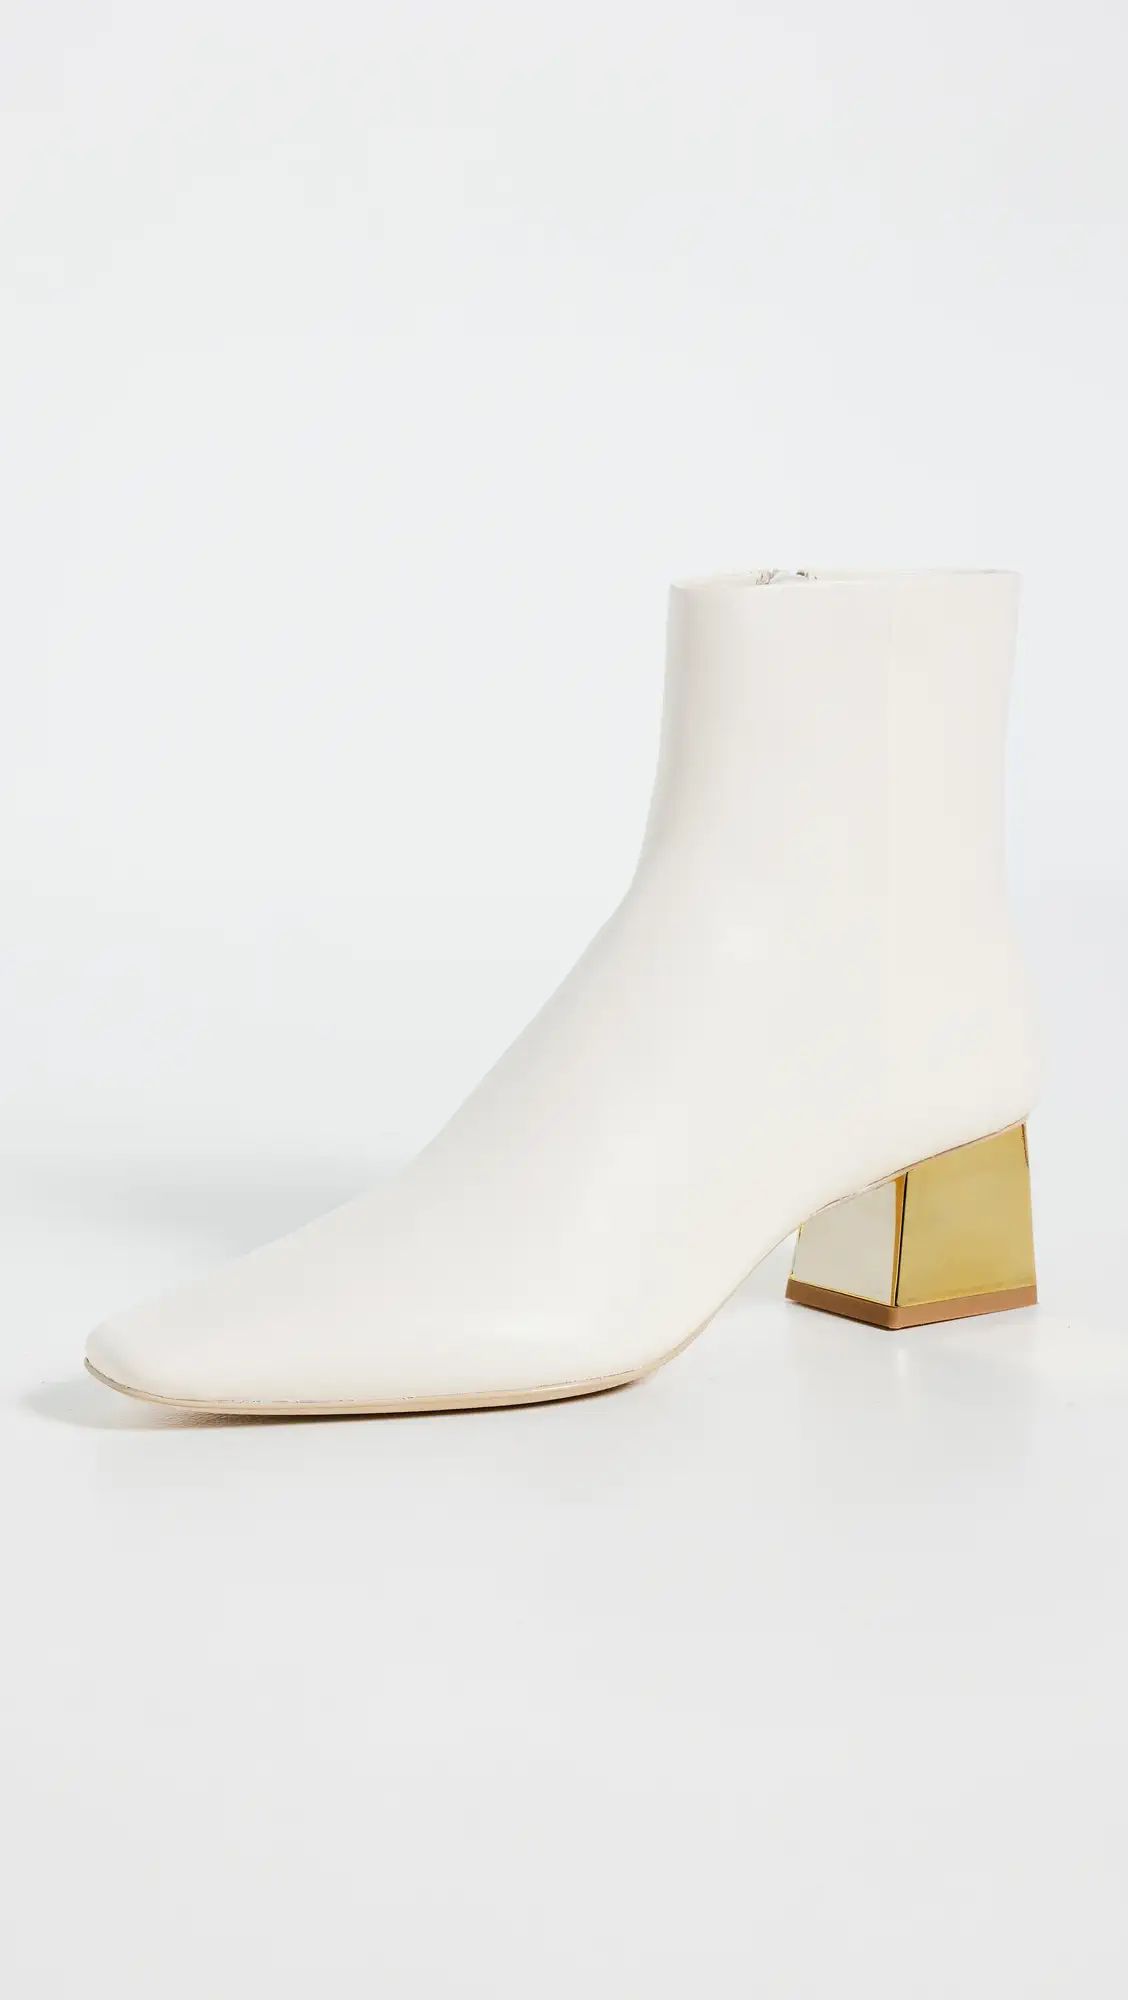 SIMKHAI Ryder Leather Square Toe Ankle Booties | Shopbop | Shopbop